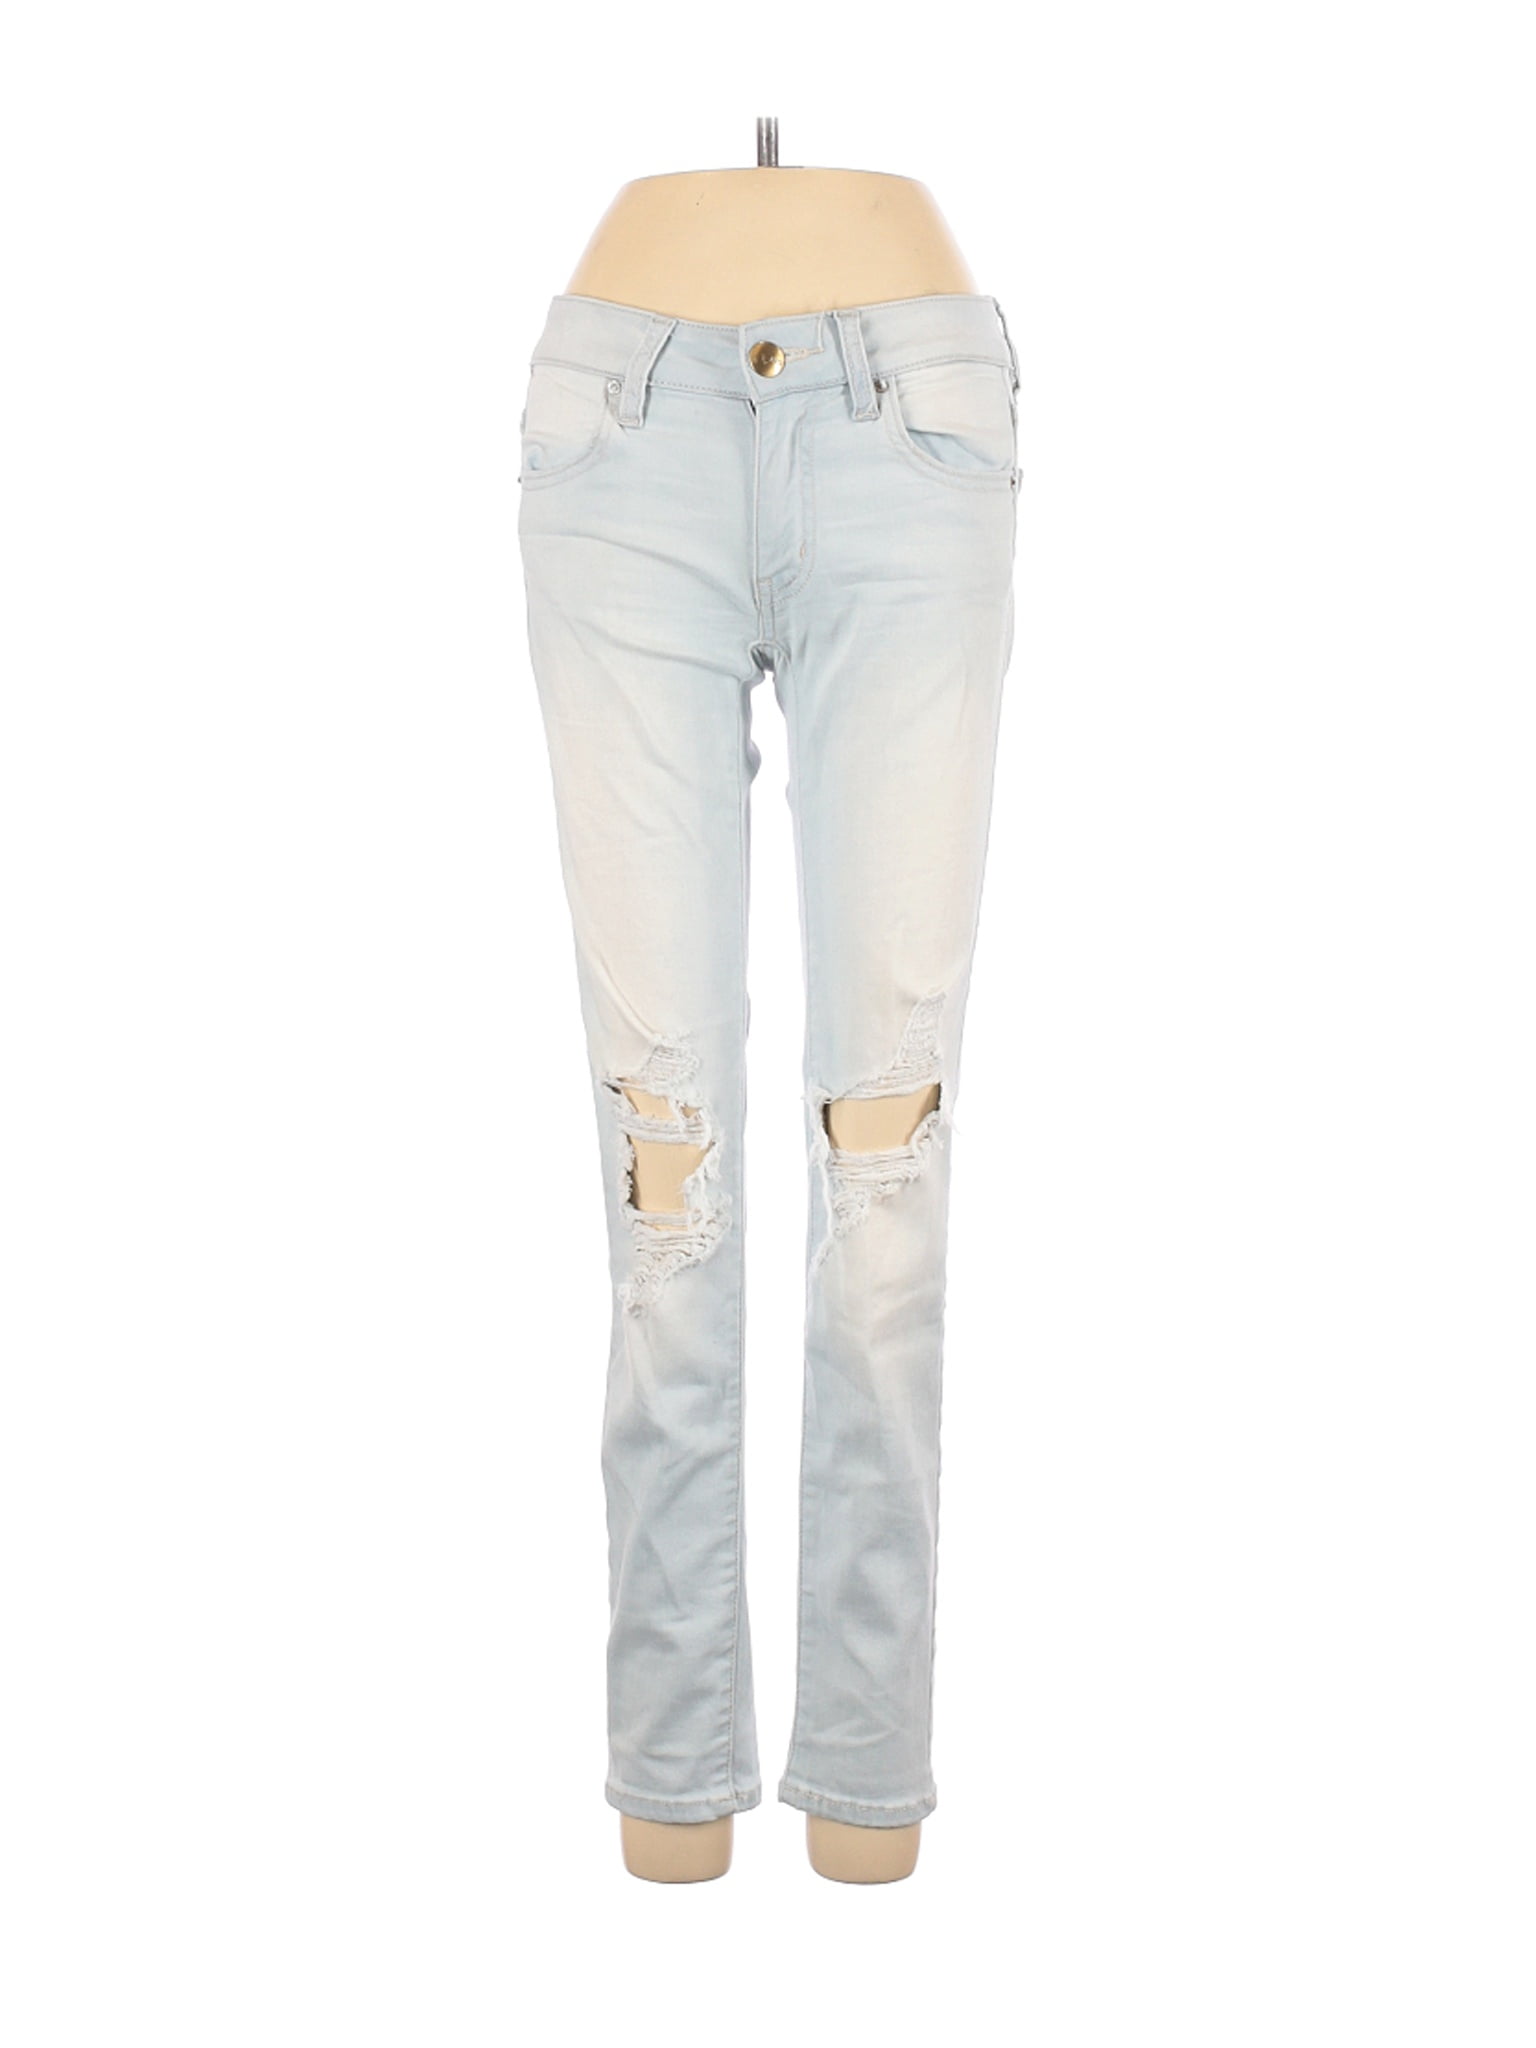 women's american eagle outfitters jeans